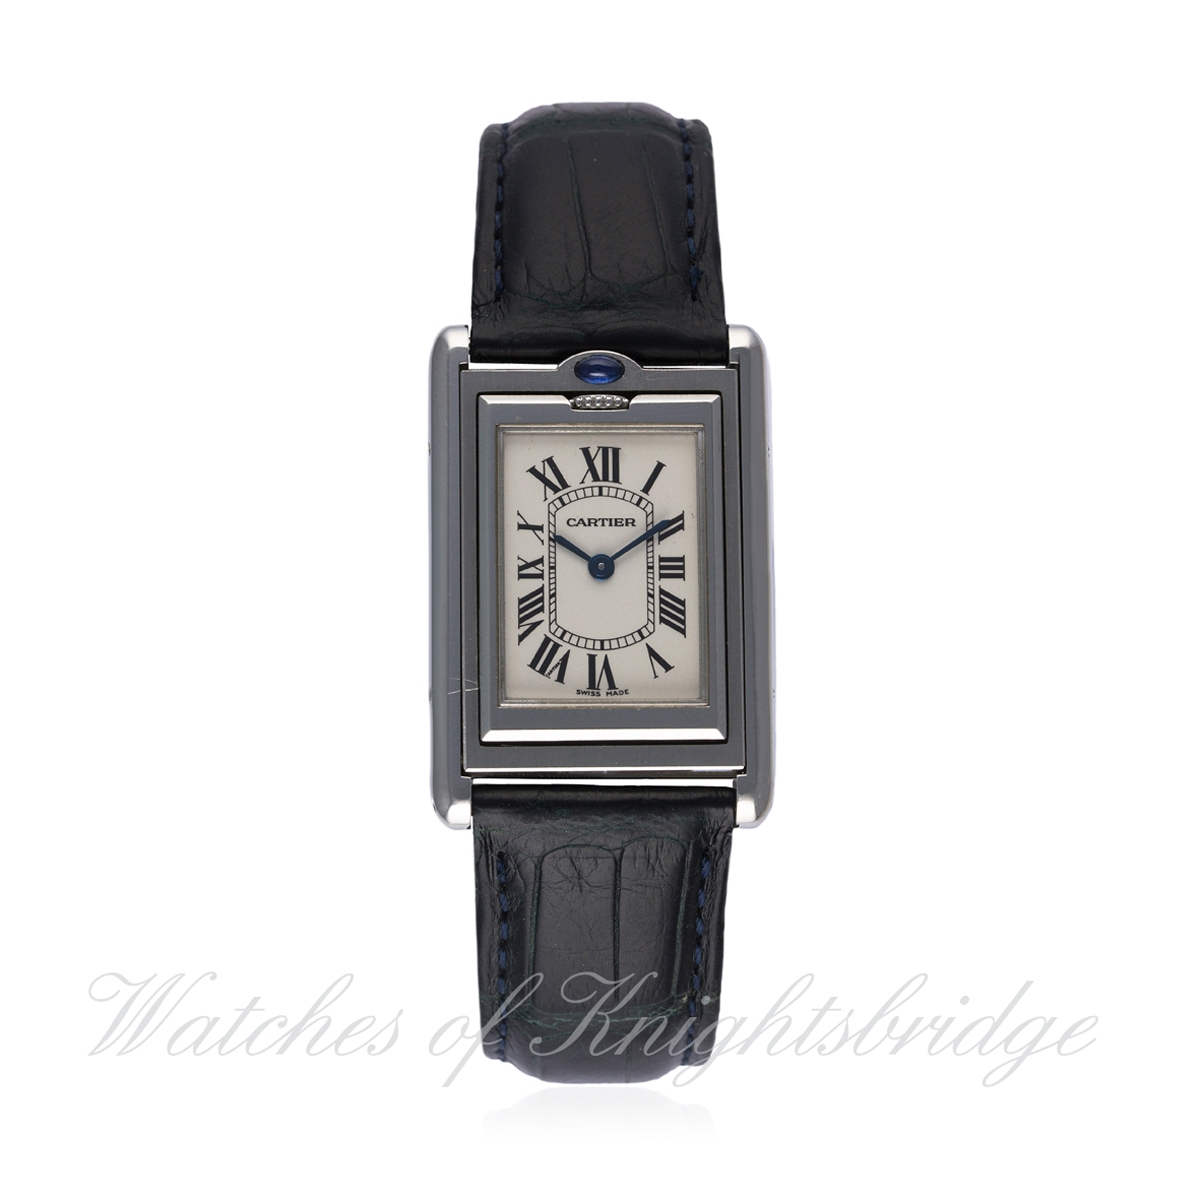 A MID SIZE STAINLESS STEEL CARTIER TANK BASCULANTE WRIST WATCH CIRCA 2002, REF. 2405
D: Silver